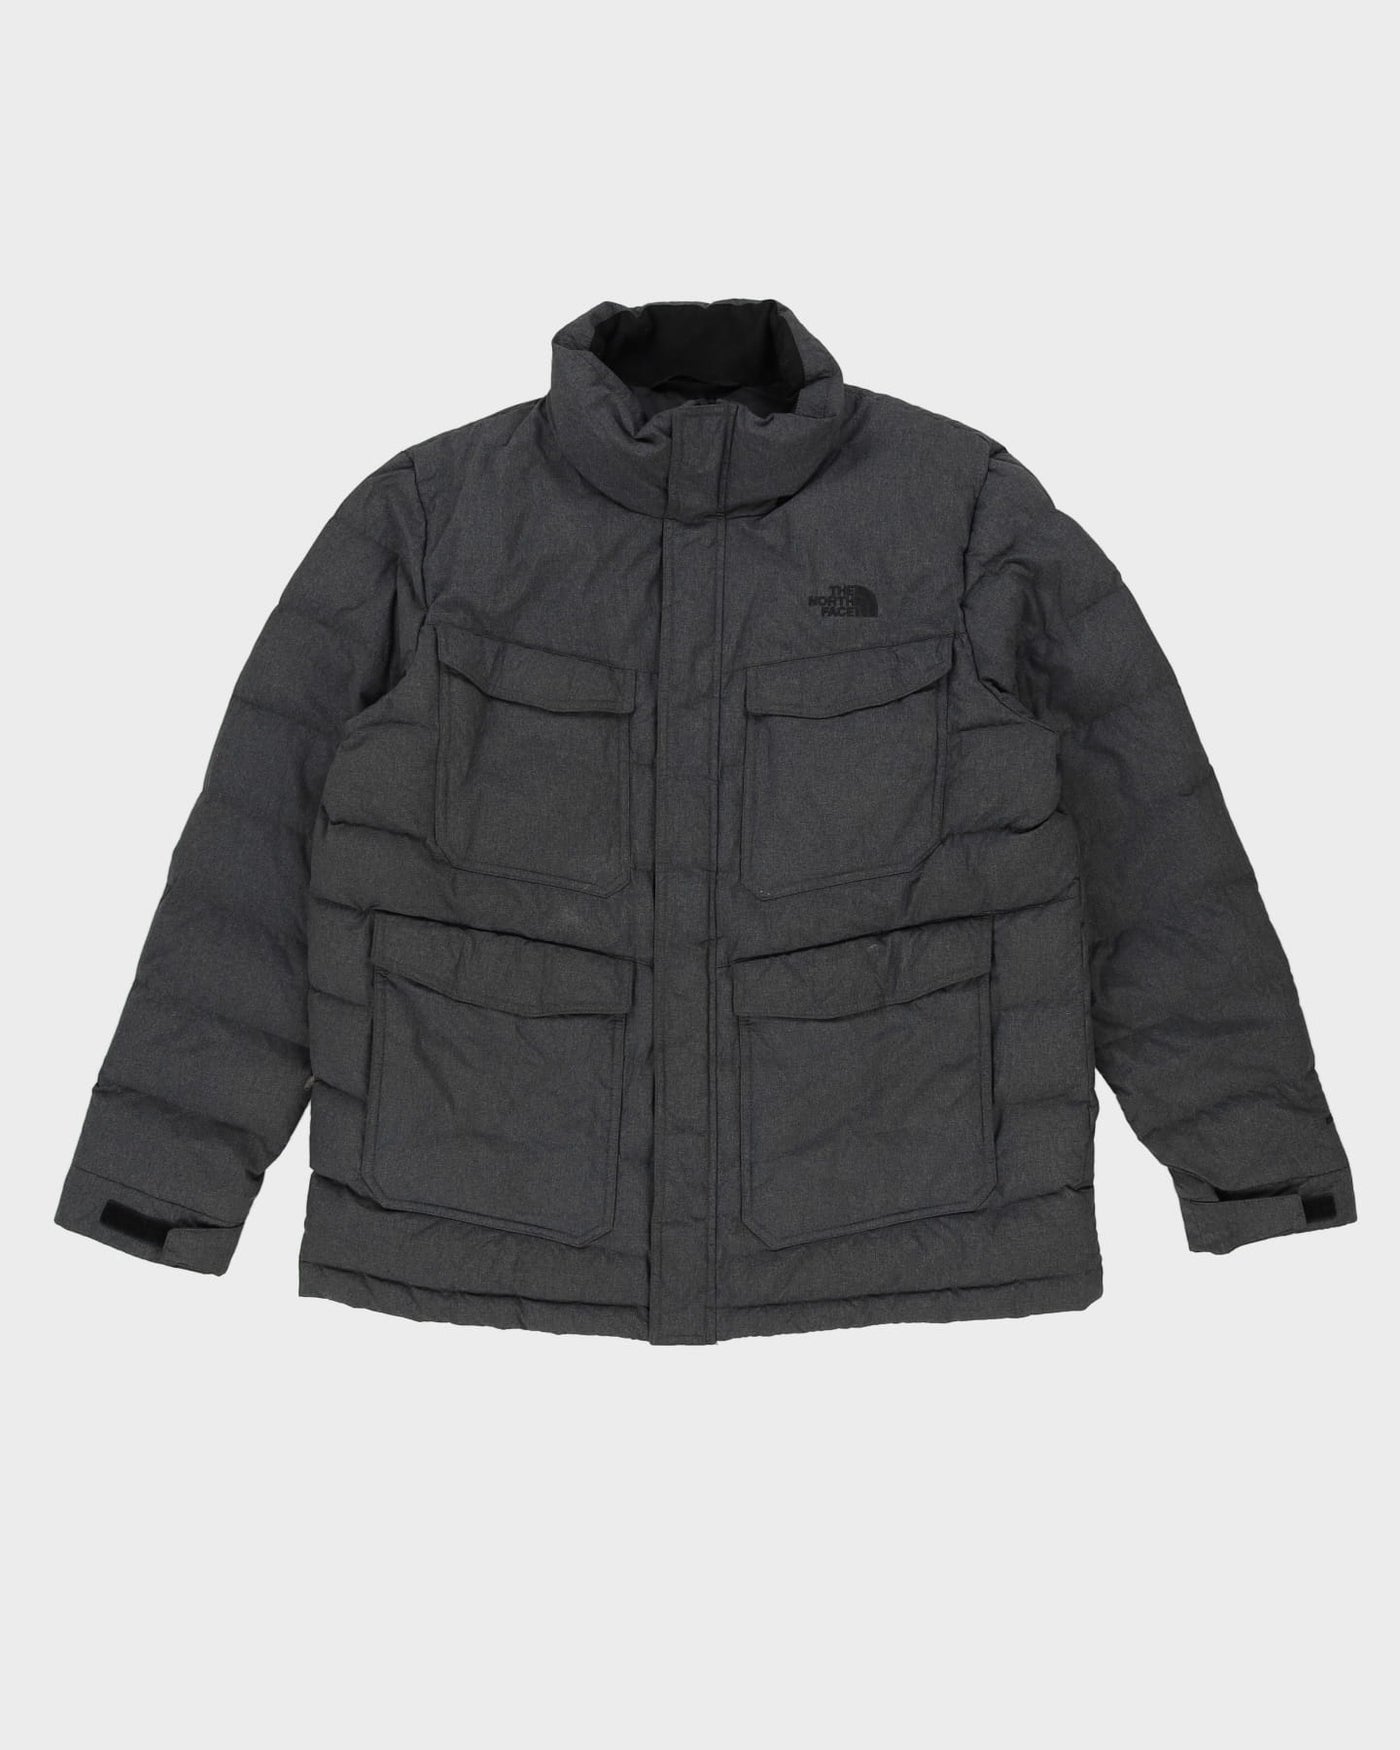 The North Face Grey Padded Jacket - XL